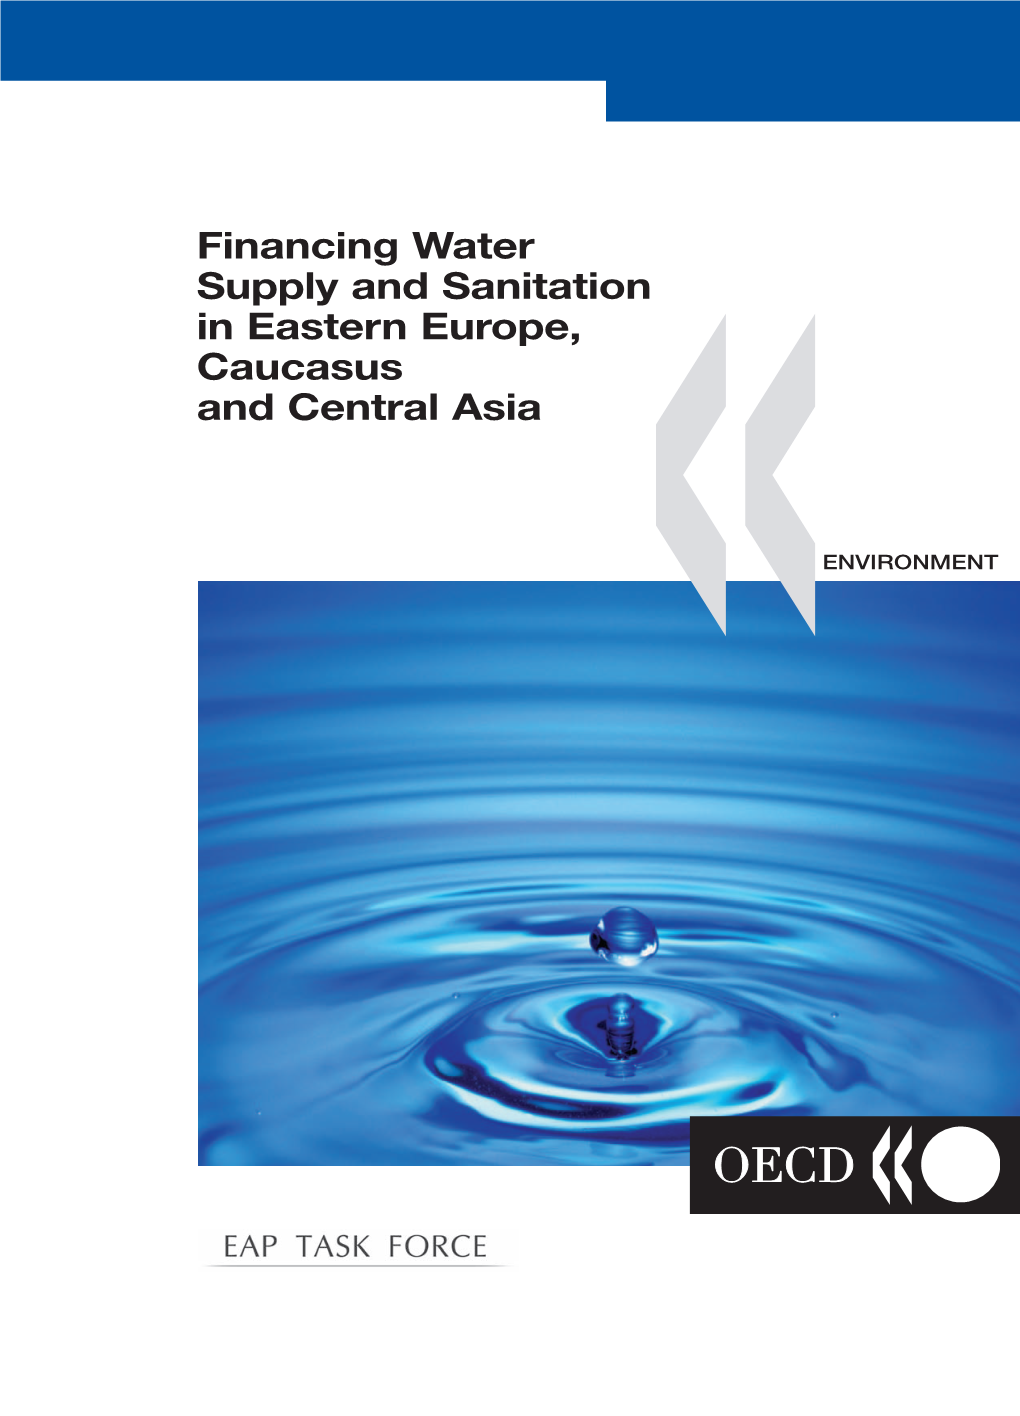 Financing Water Supply and Sanitation in Eastern